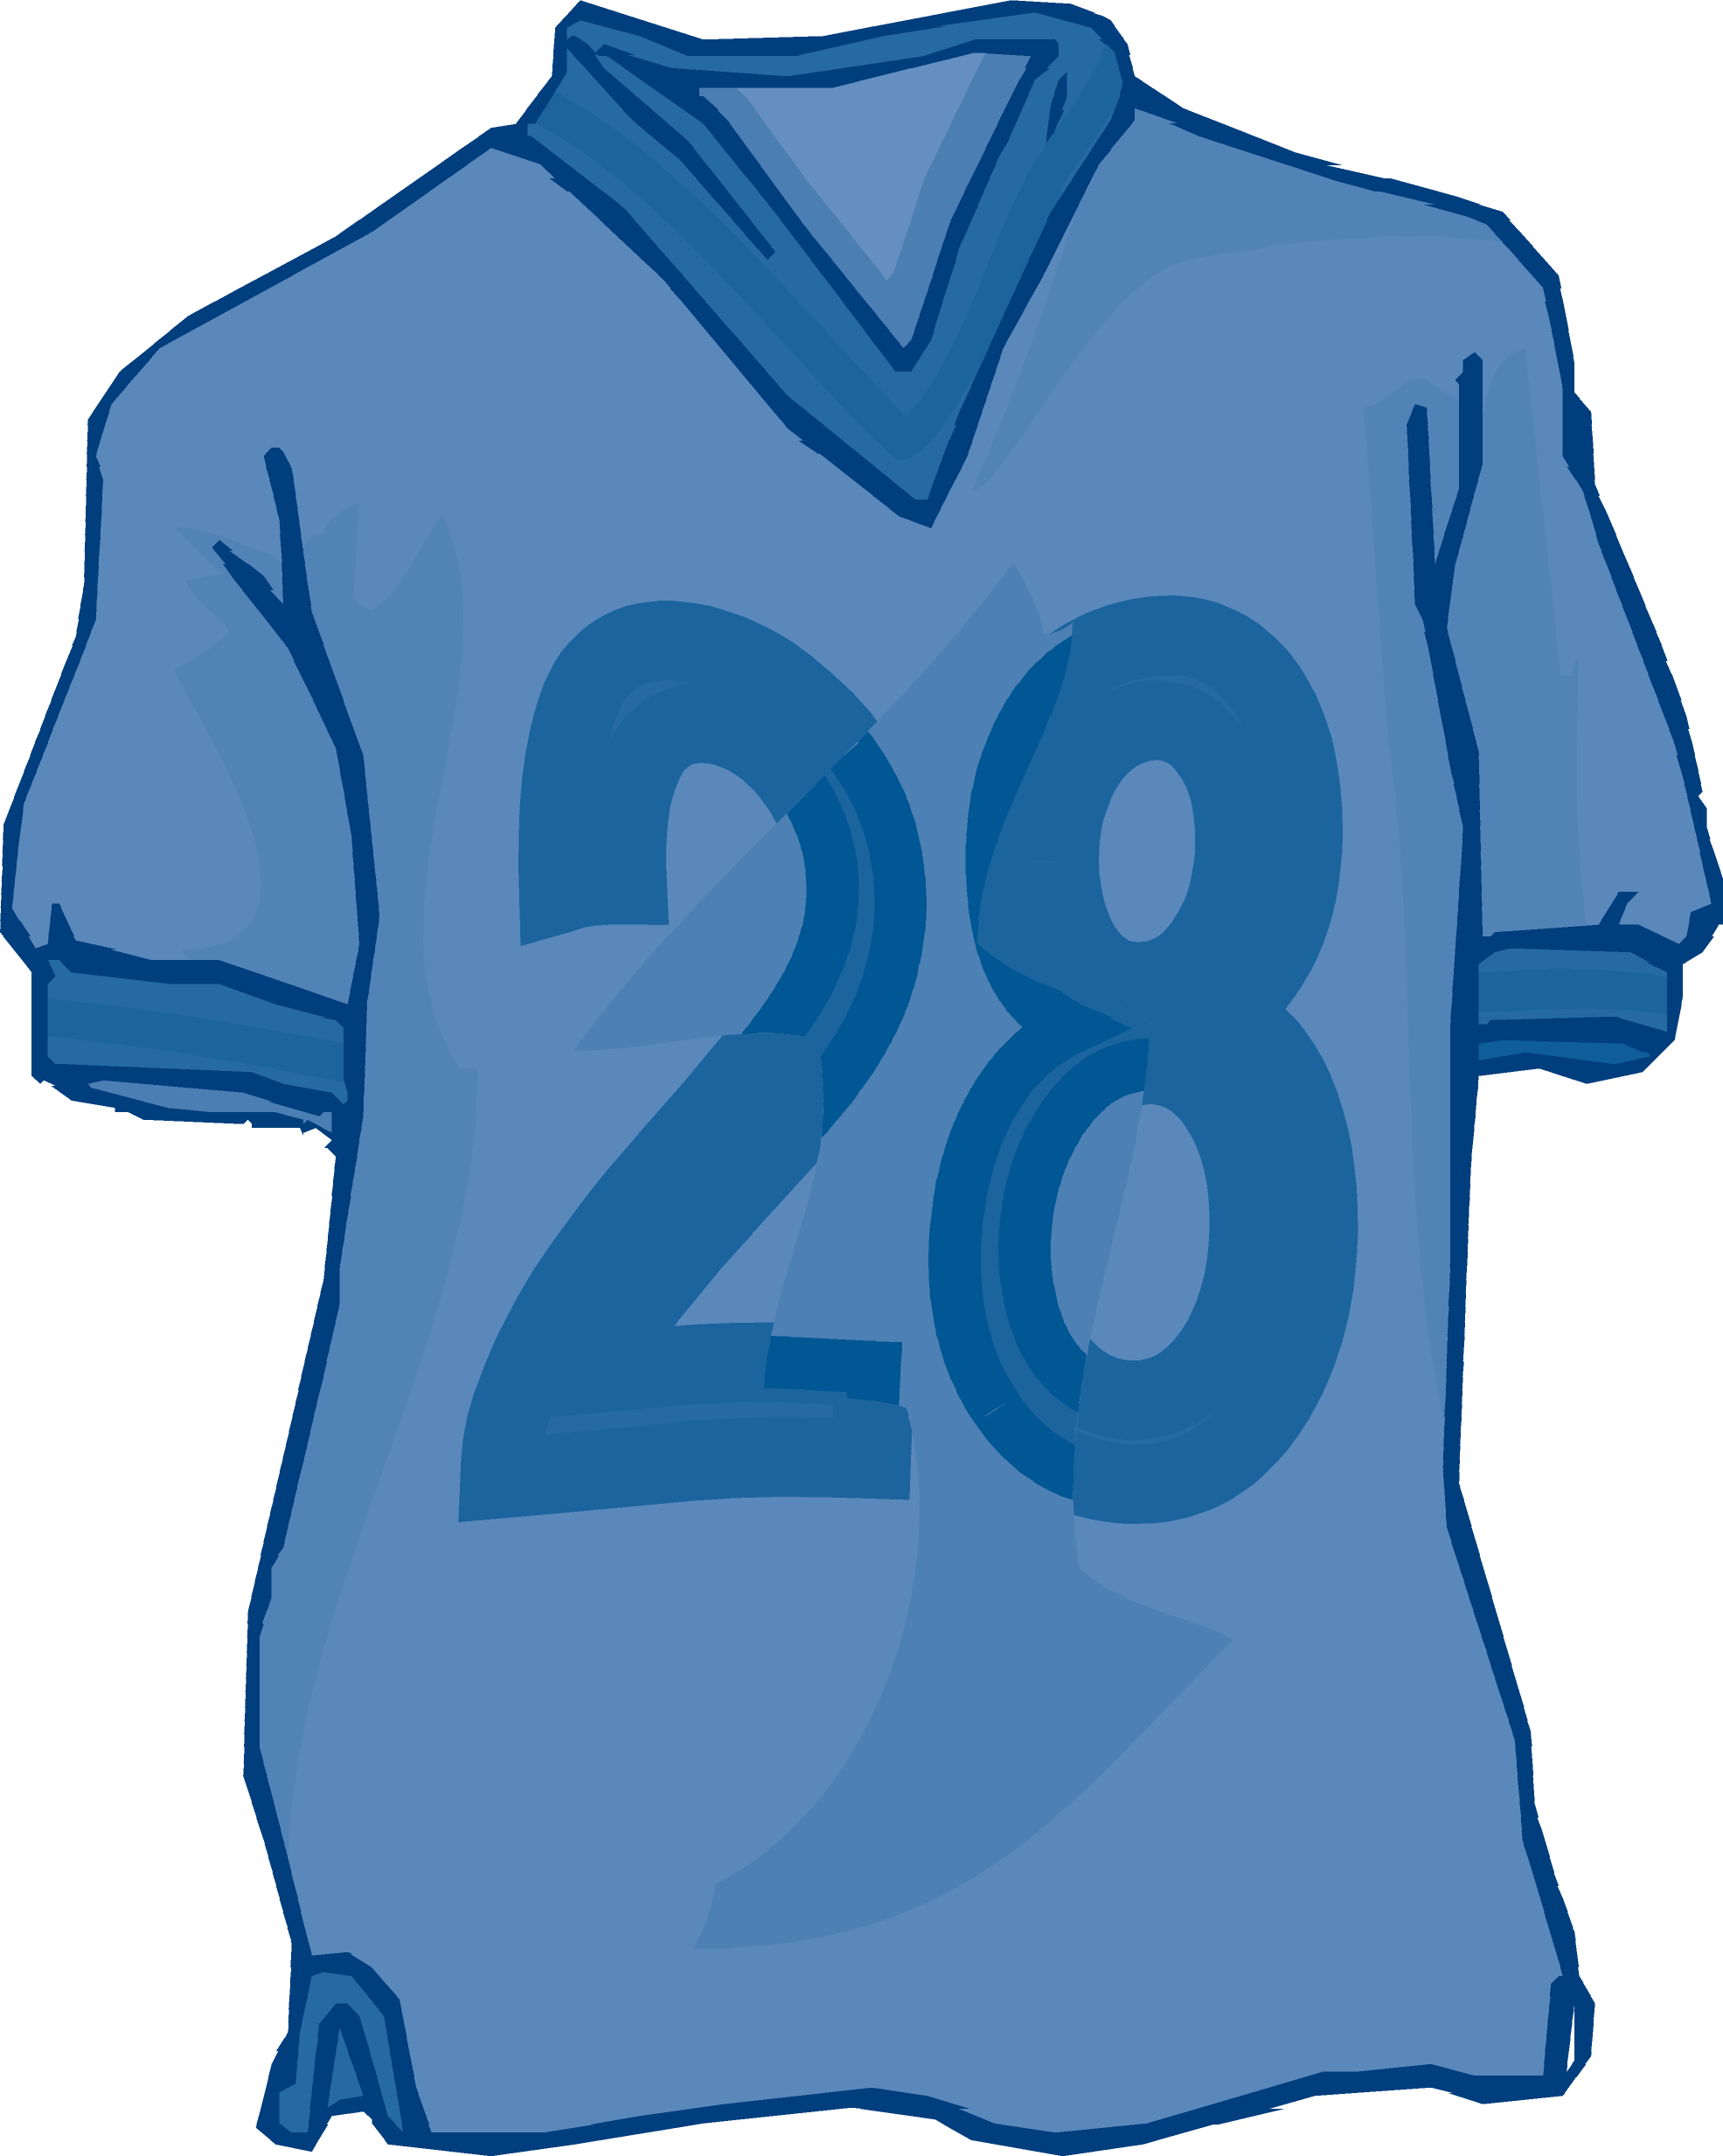 Free Sport Jersey Cliparts, Download Free Clip Art, Free.